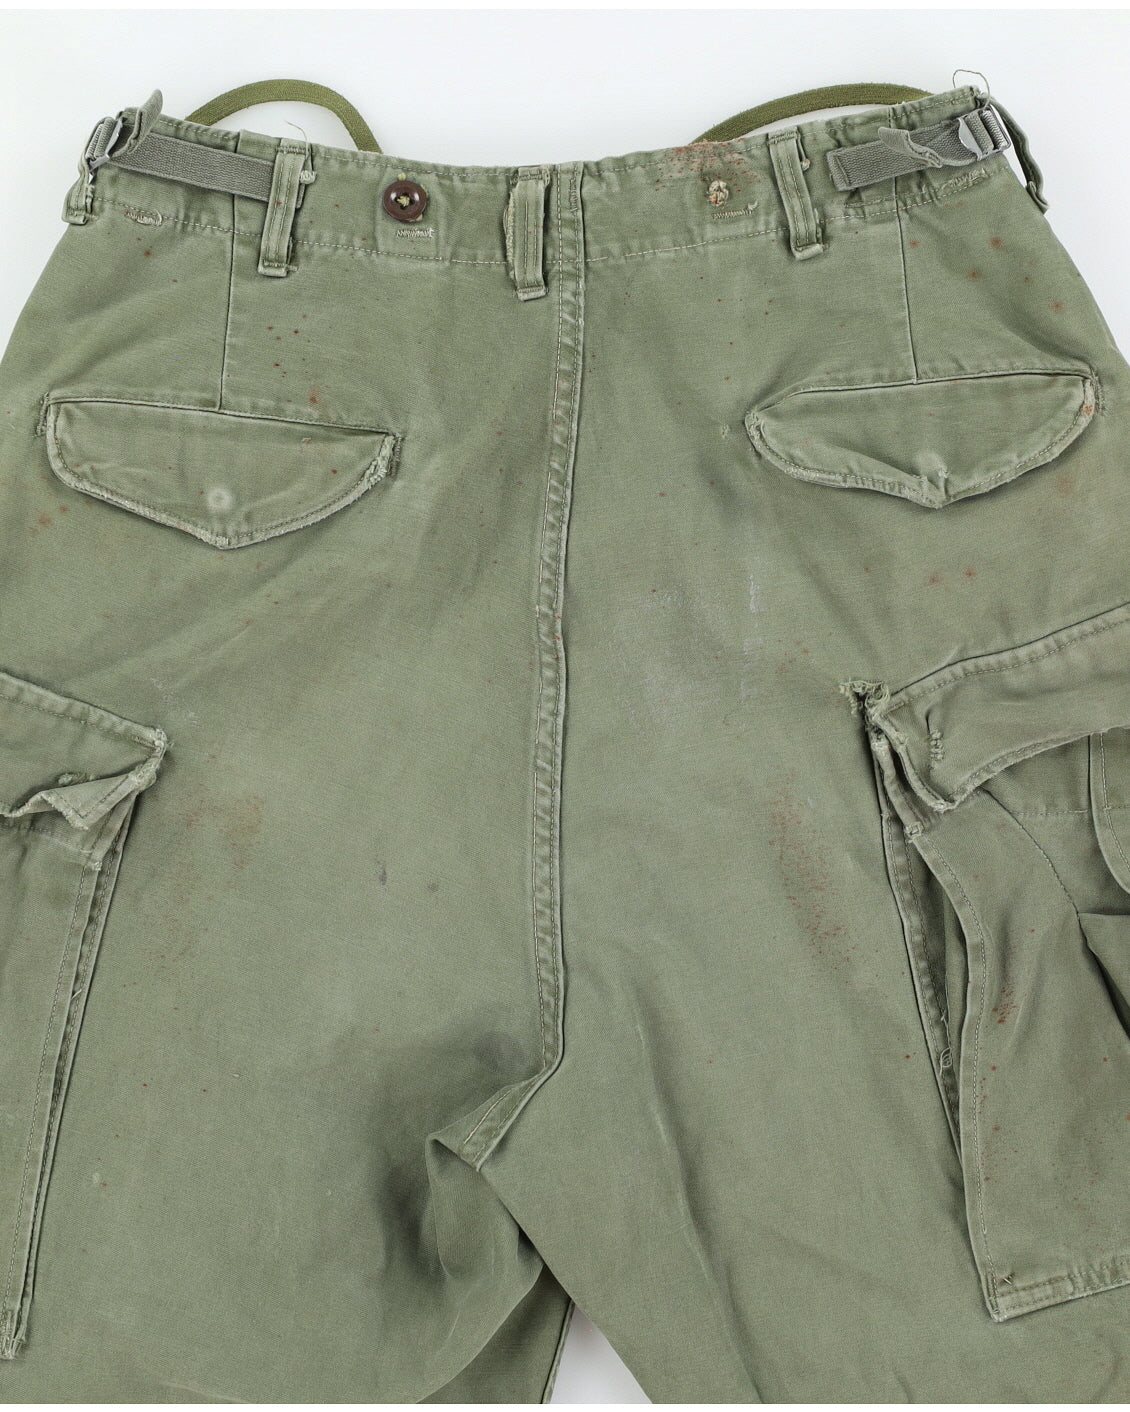 50s US Army M51 Fields Trousers - 30x25